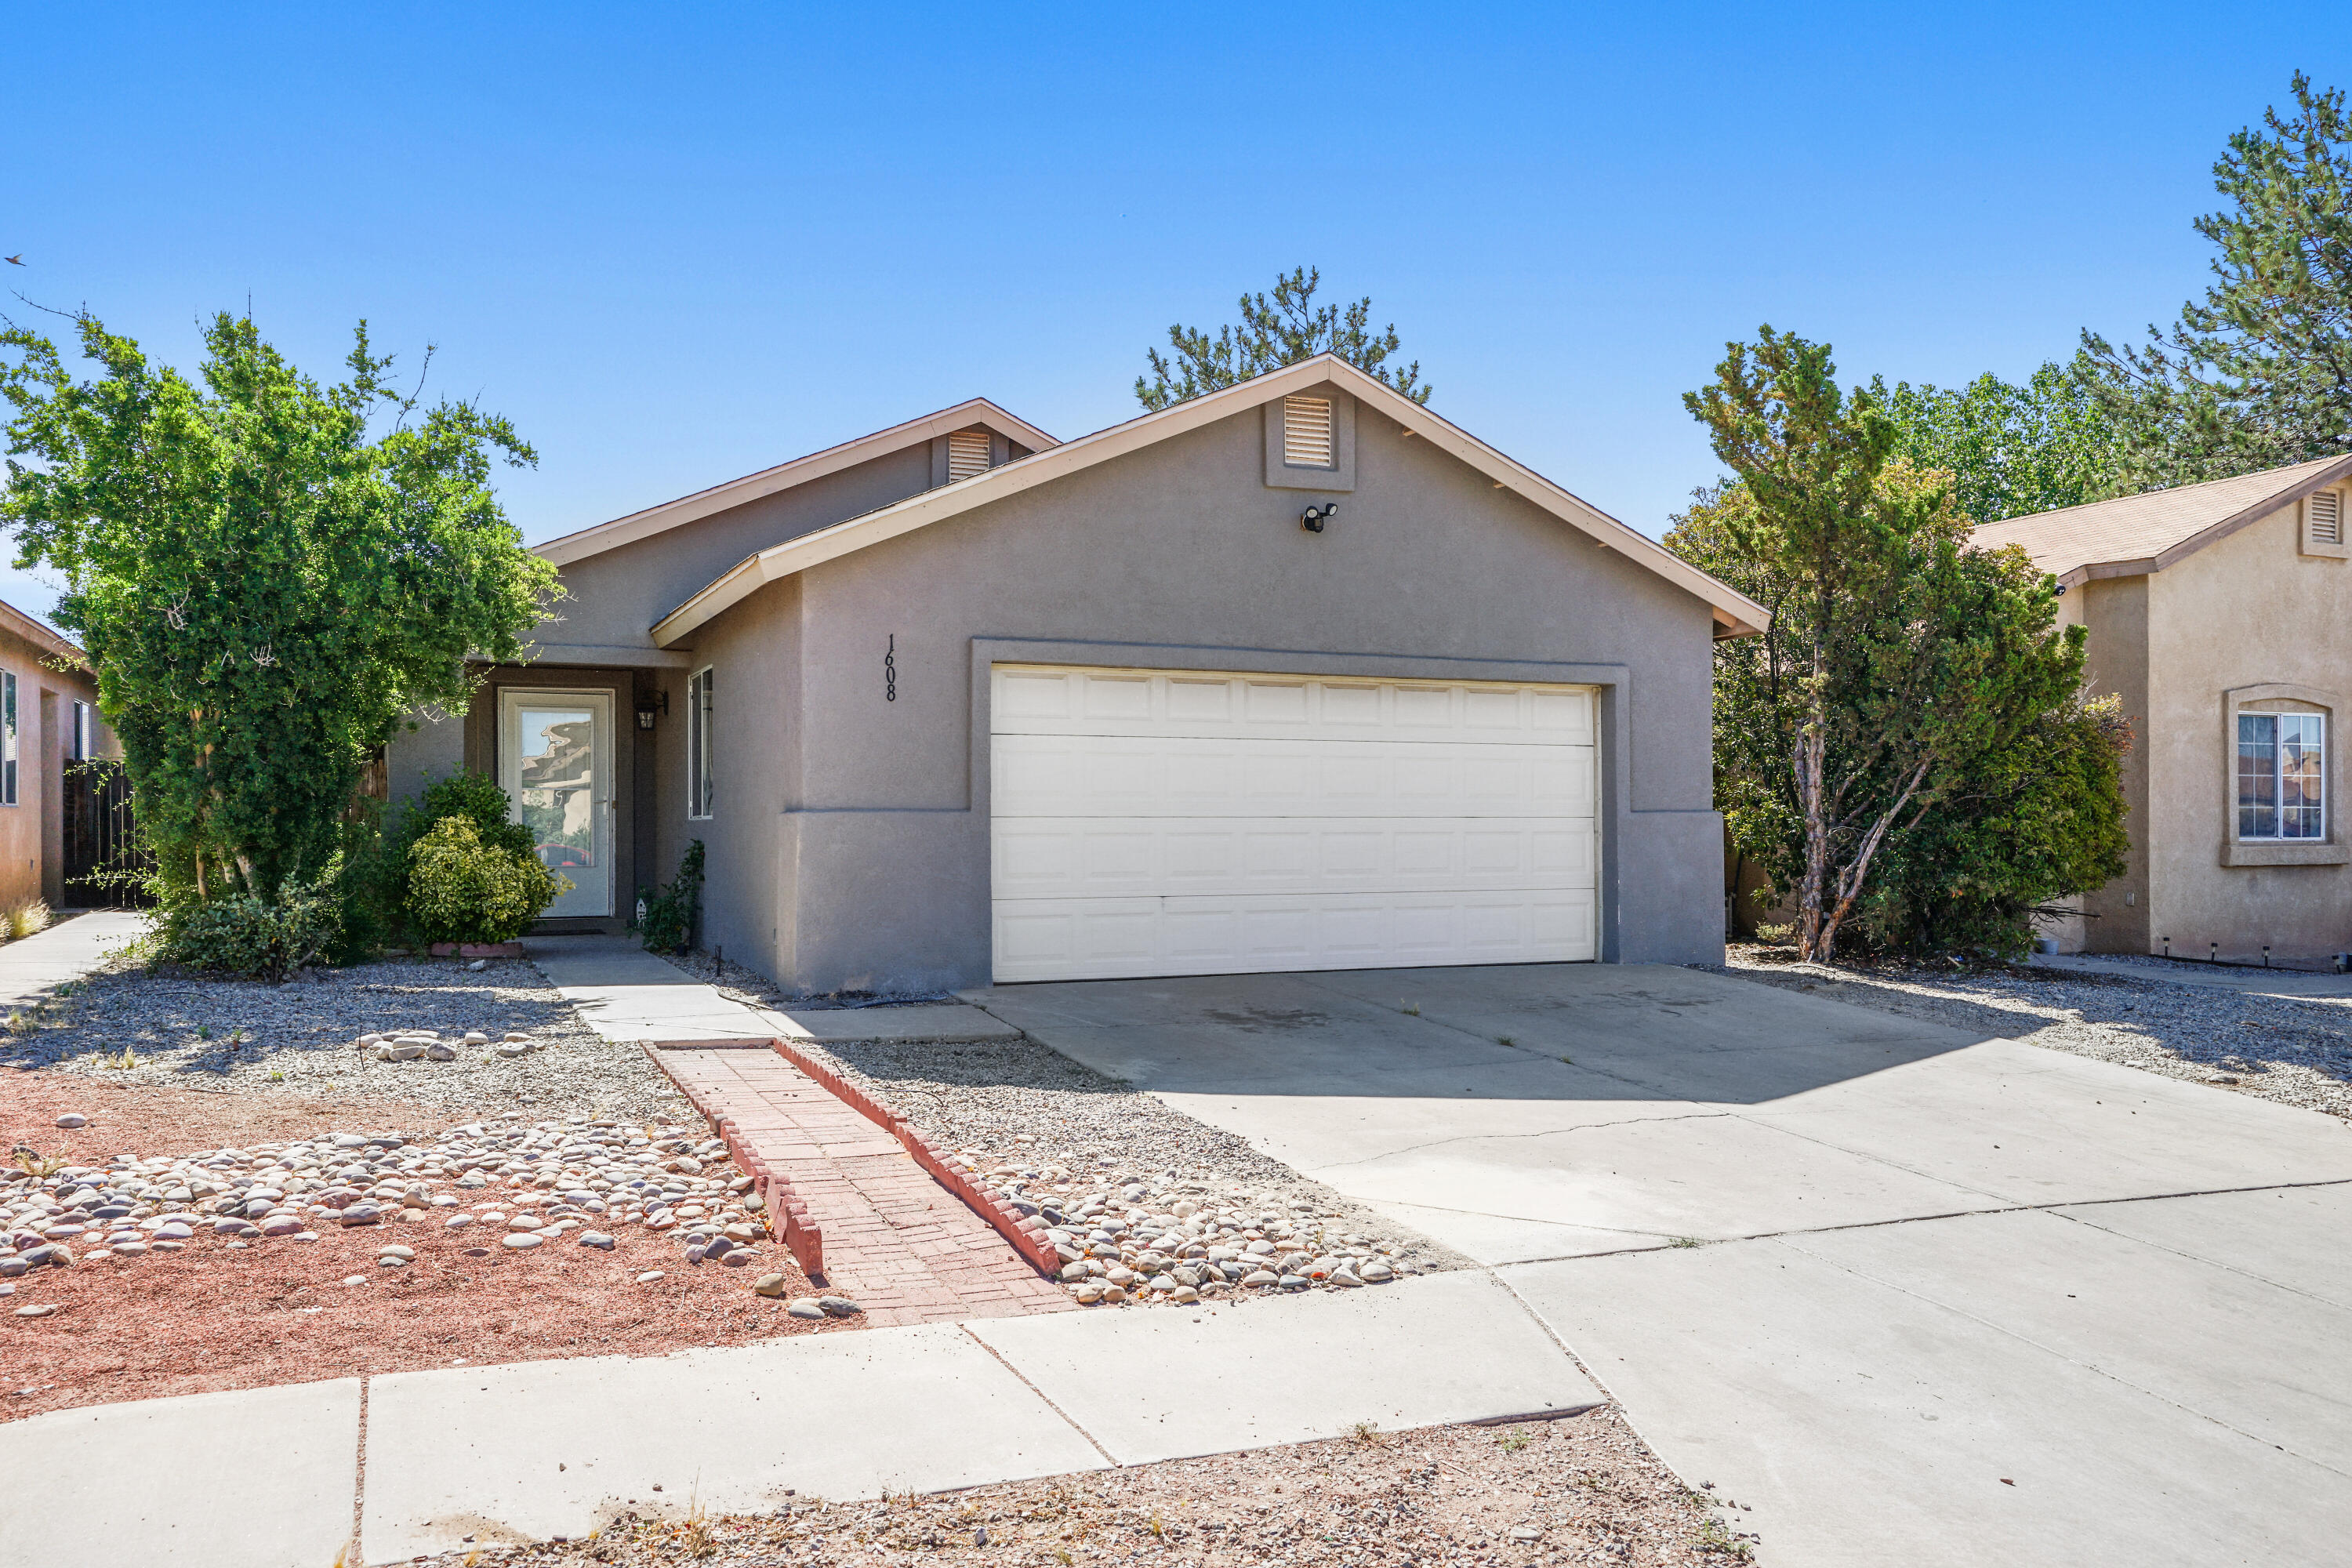 Great single level home! Move in ready with views of the Sandias!  New interior paint, carpet, and laminate wood flooring.  All kitchen appliances stay with the home.  Come show today!